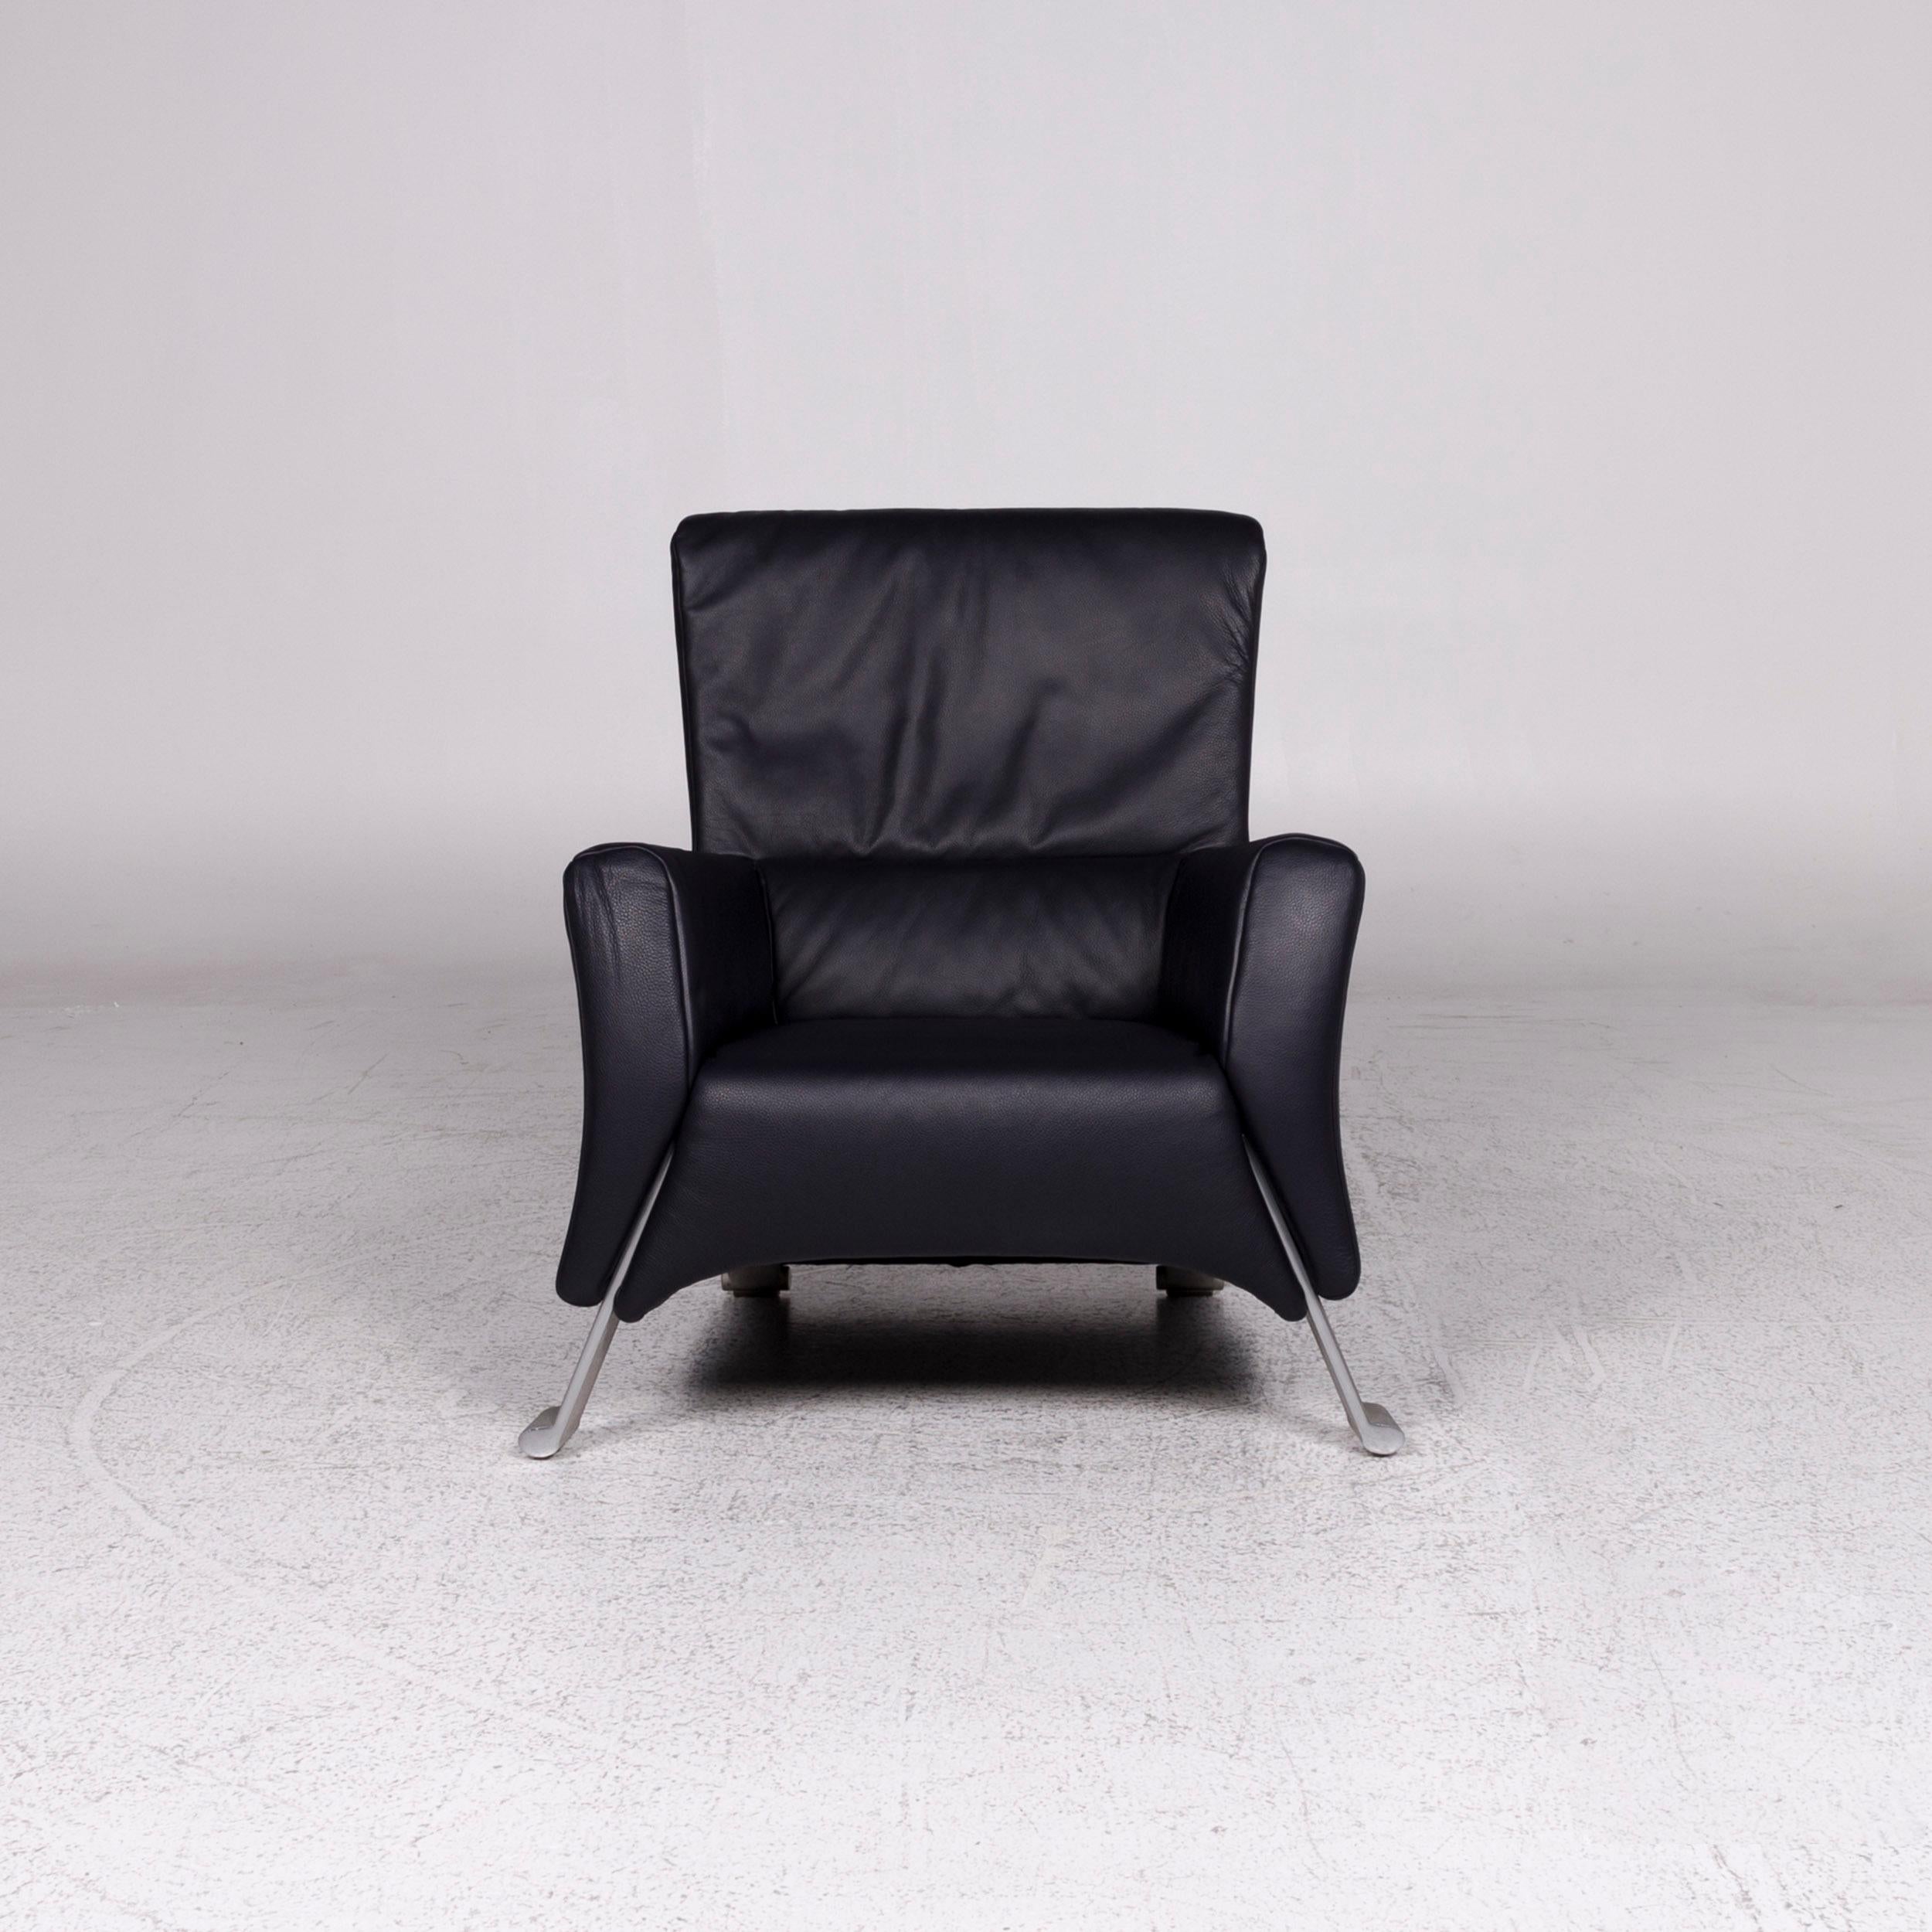 We bring to you a Rolf Benz 322 leather armchair incl. Stool dark blue.
 
 Product measurements in centimeters:
 
Depth 84
Width 86
Height 91
Seat-height 40
Rest-height 58
Seat-depth 49
Seat-width 46
Back-height 45.
 